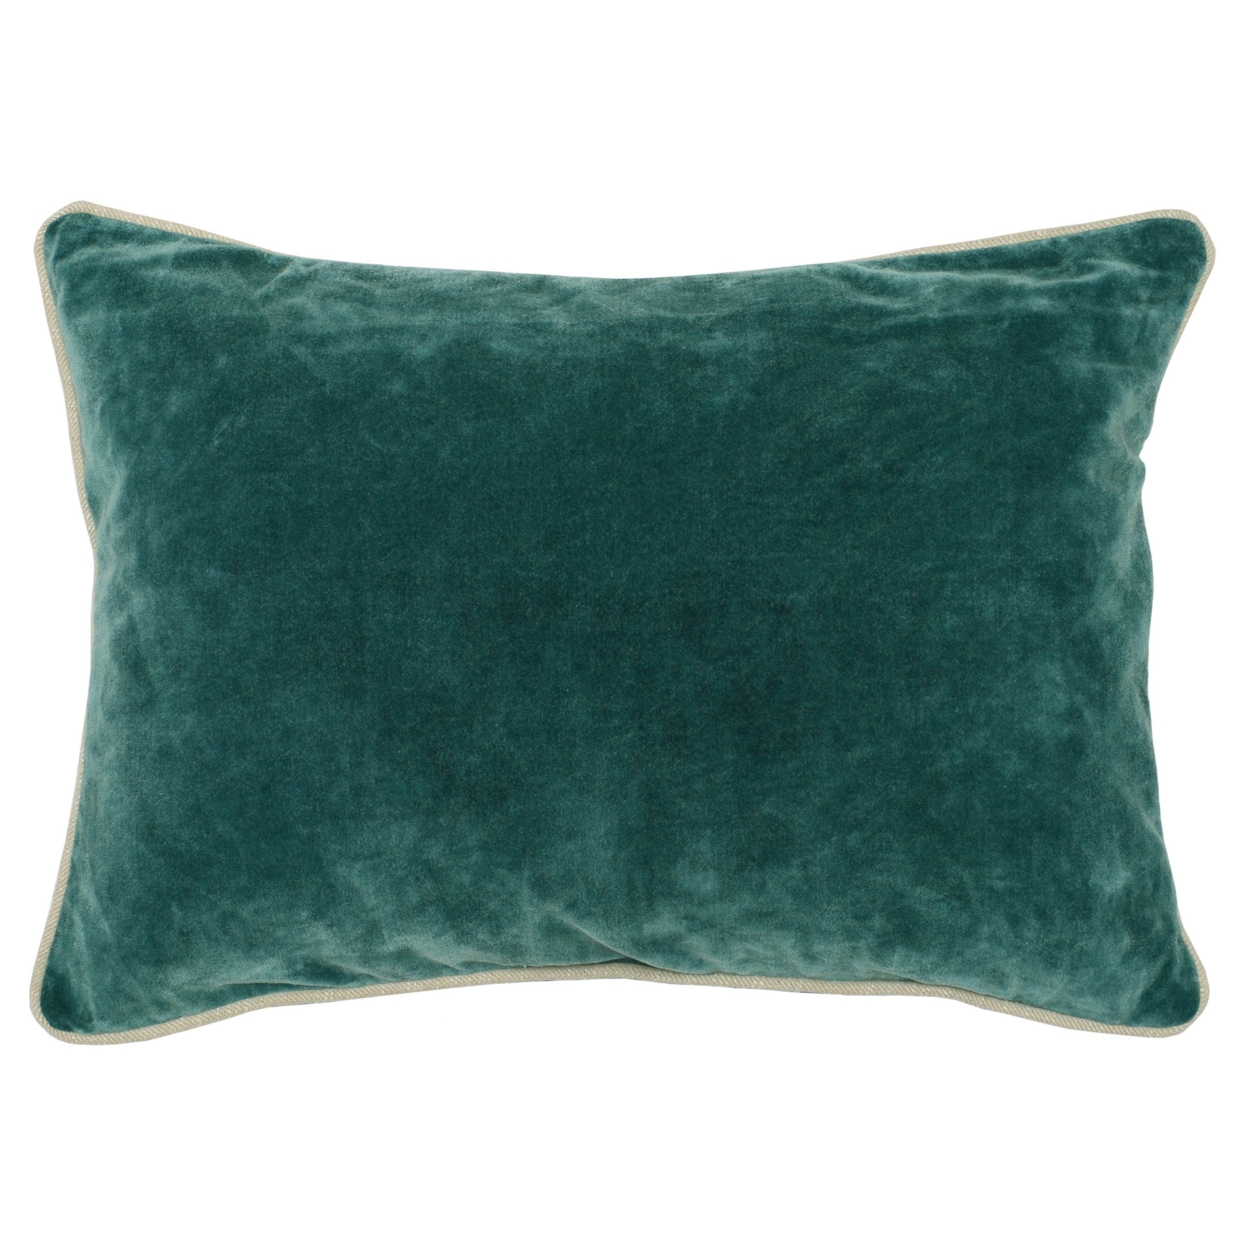 Rectangular Fabric Throw Pillow With Solid Color And Piped Edges,Teal Green- Saltoro Sherpi